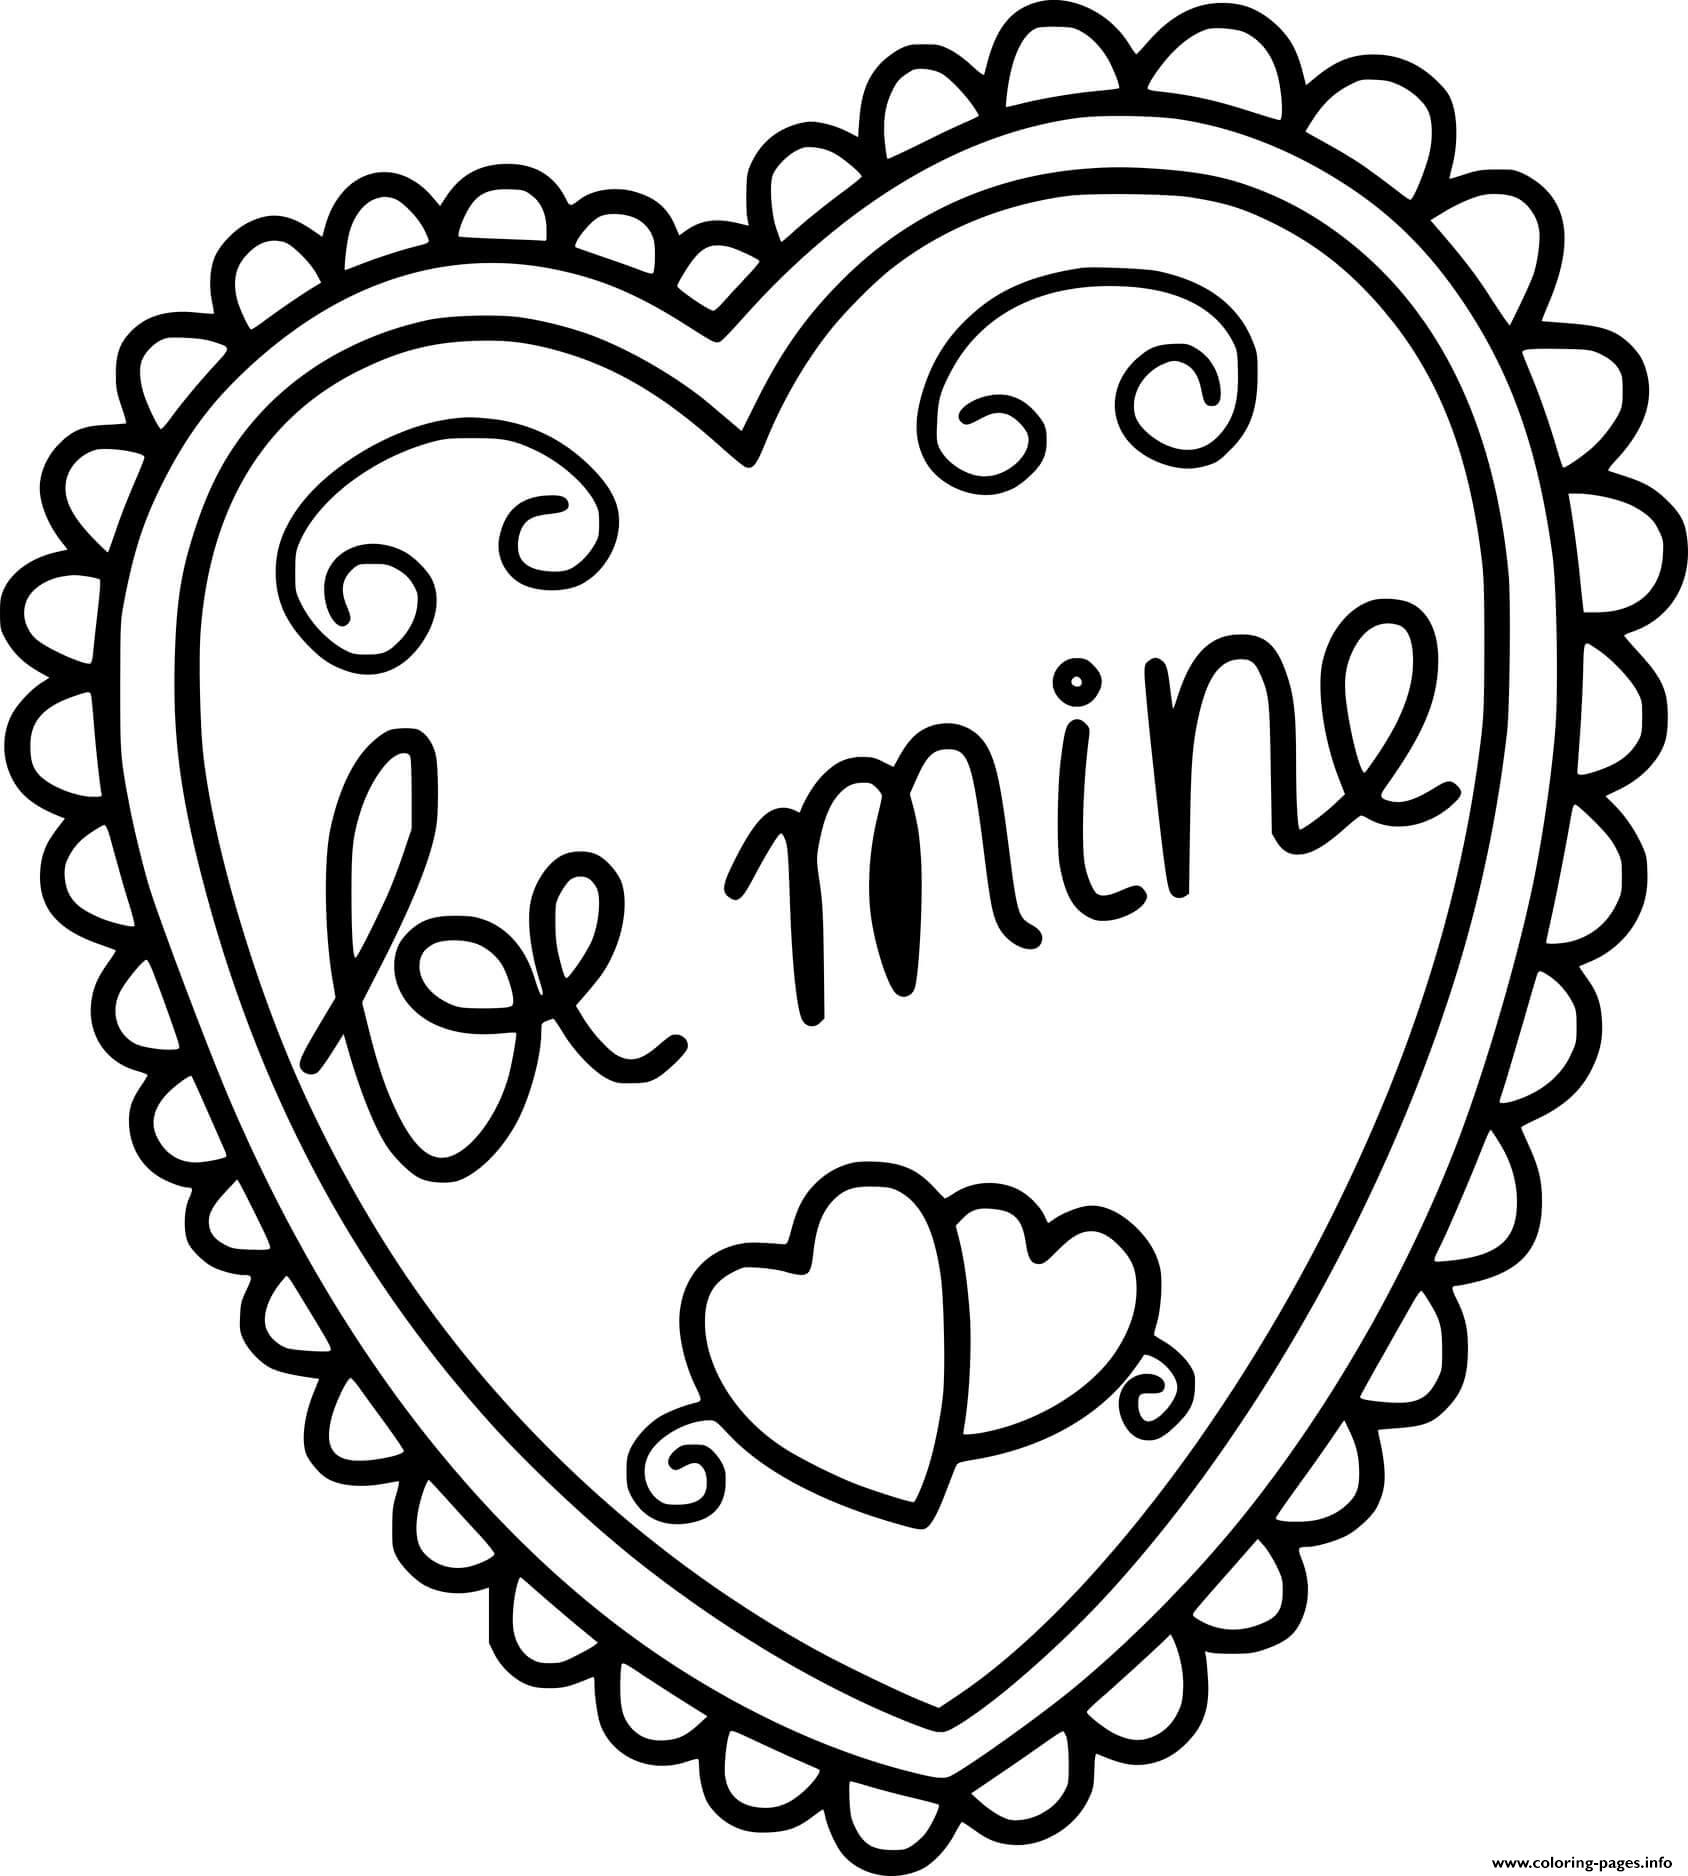 Be Mine Heart coloring